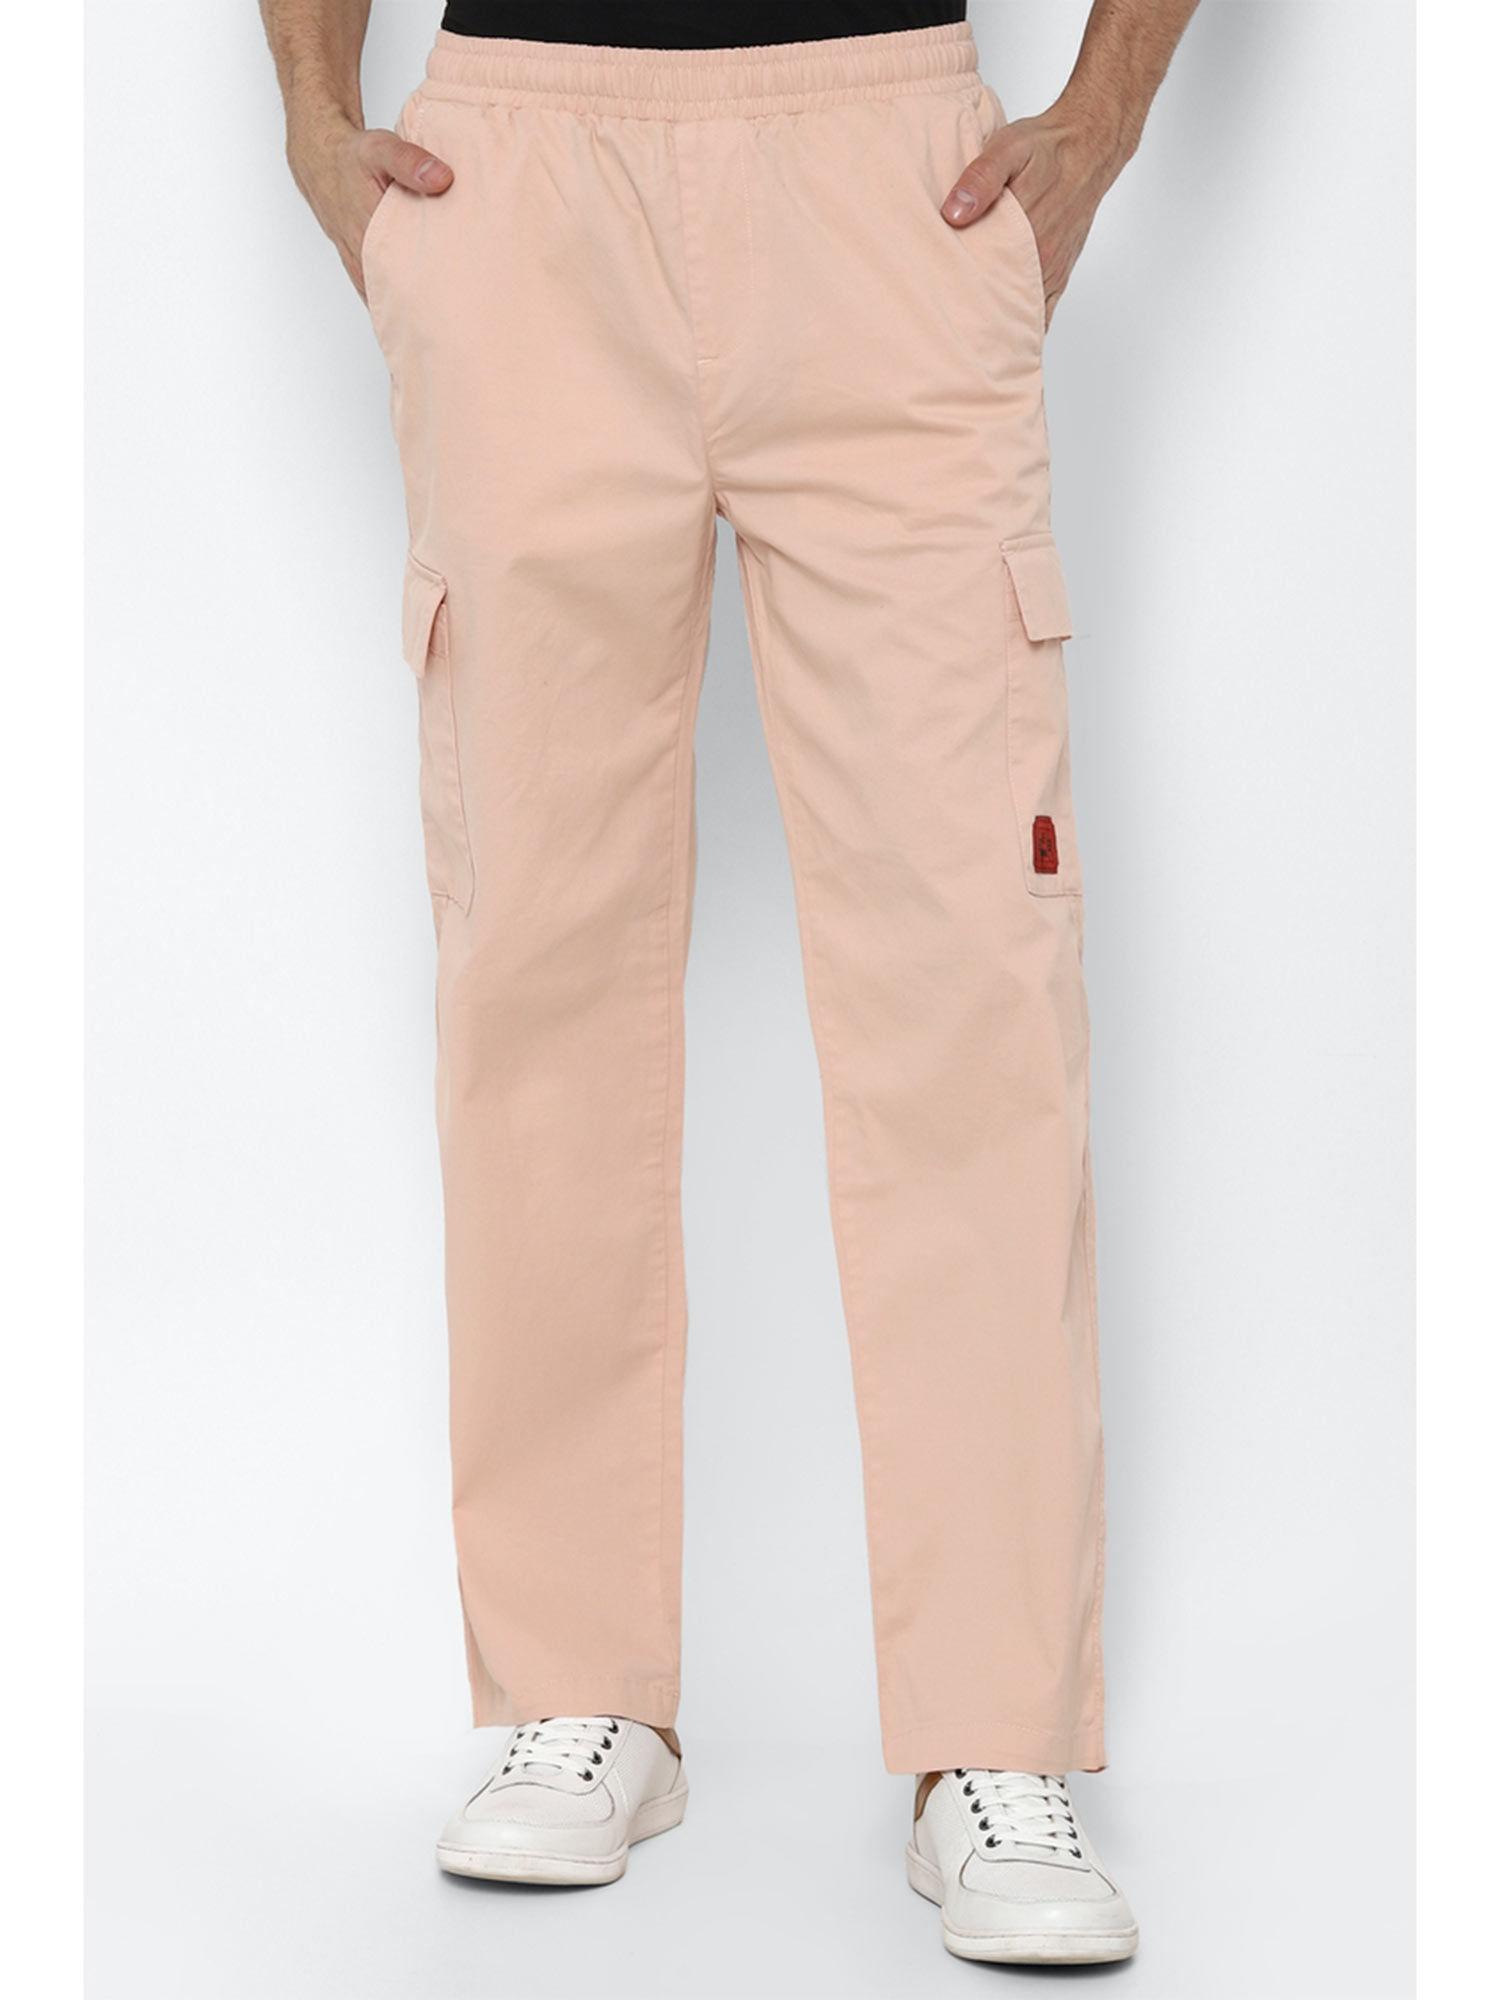 solid pink casual trouser